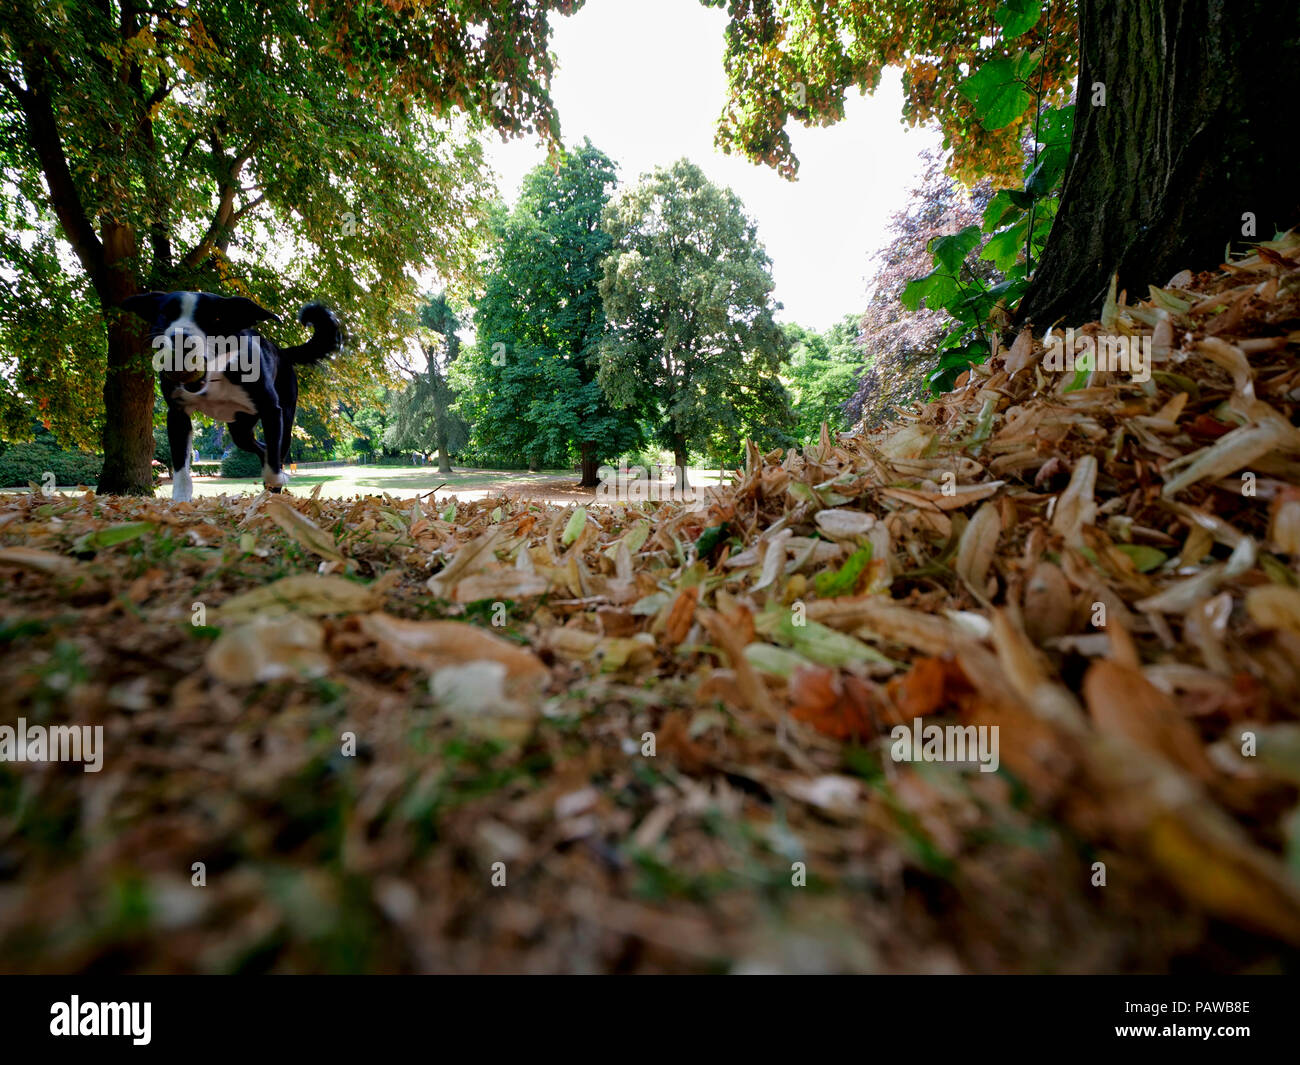 Ashbourne, UK. 25th July 2018. UK Weather: Autumn leaves fall in Ashbourne in July. The unusually hot sunny weather is causing the leaves to dry up & fall to the ground in Ashbourne Park, Derbyshire, making it feel like autumn has come early. Credit: Doug Blane/Alamy Live News Stock Photo